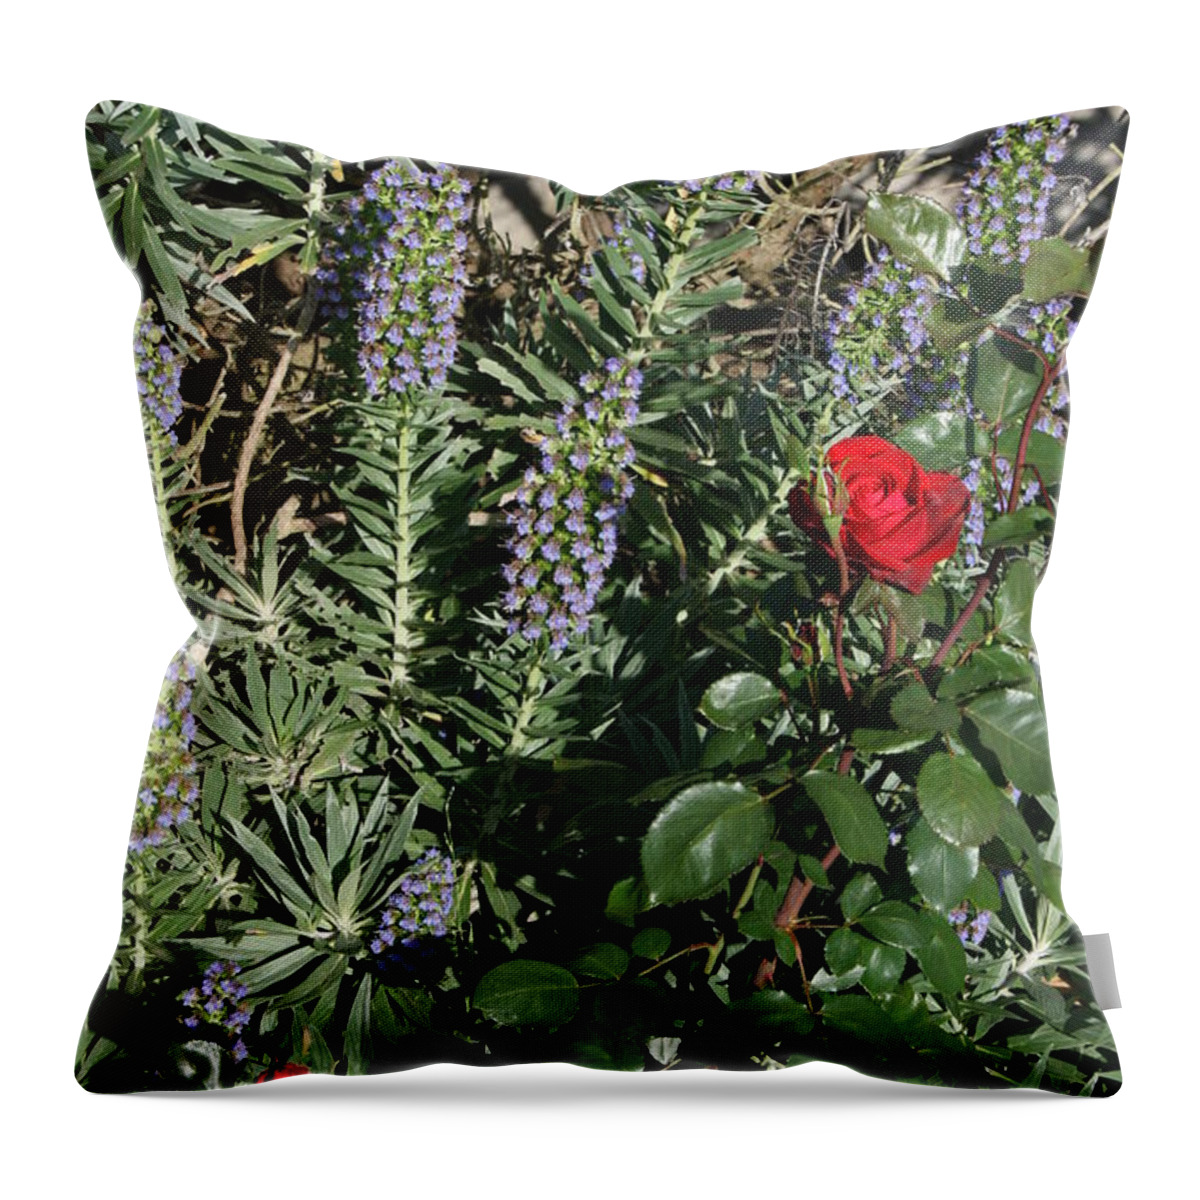 Ecchium Throw Pillow featuring the photograph Thorns by Cynthia Marcopulos